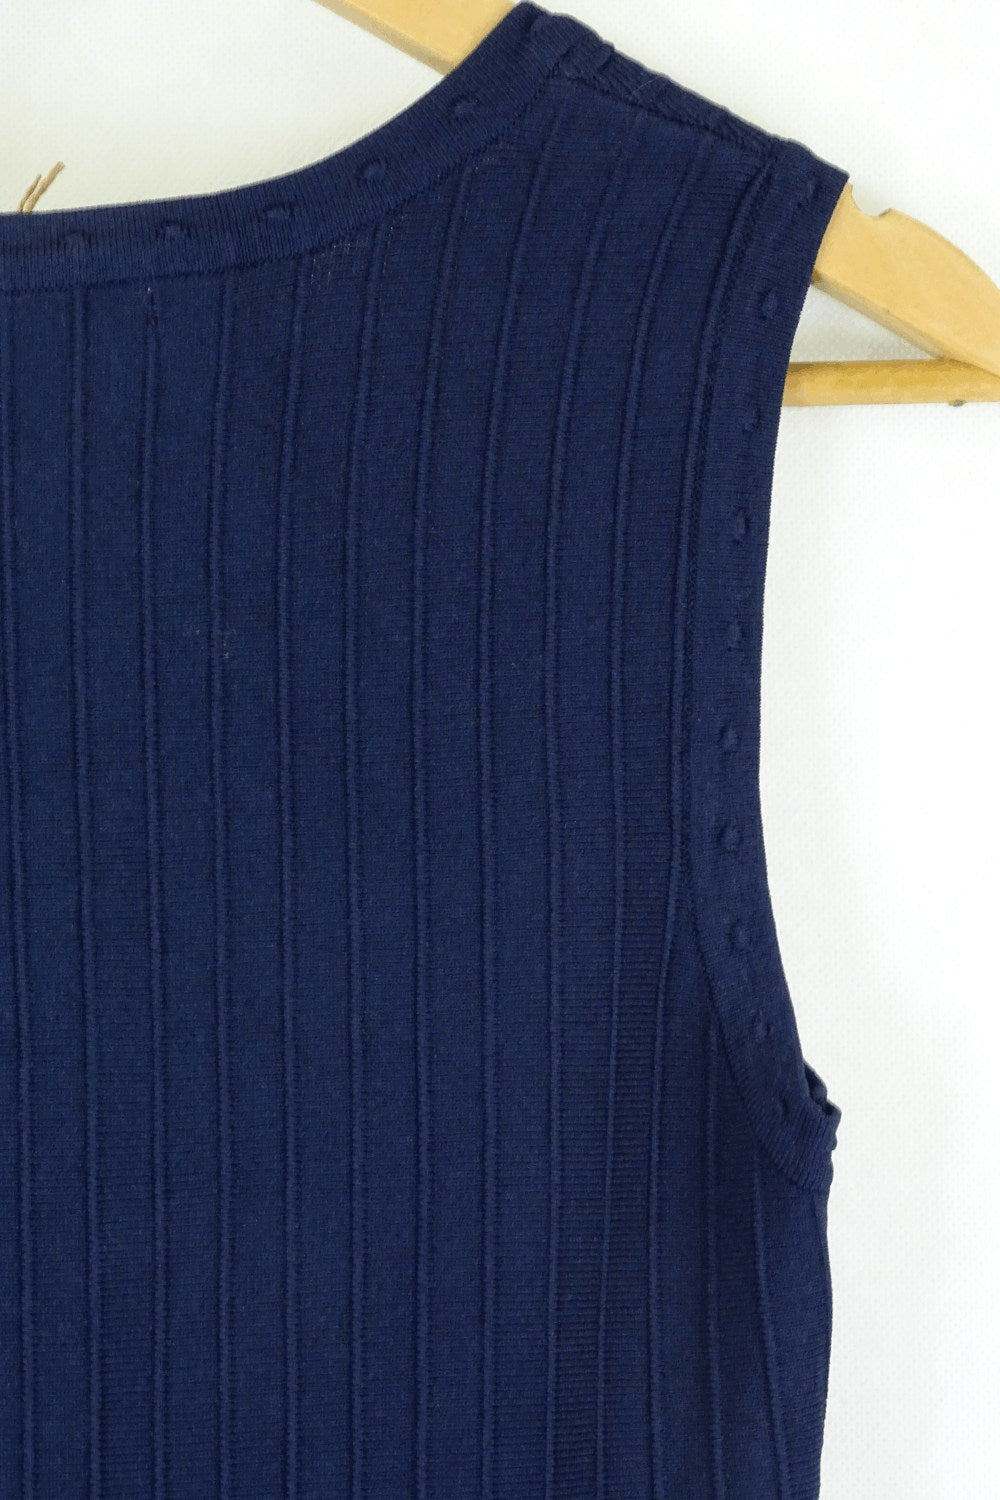 Review Navy Knit Dress 6